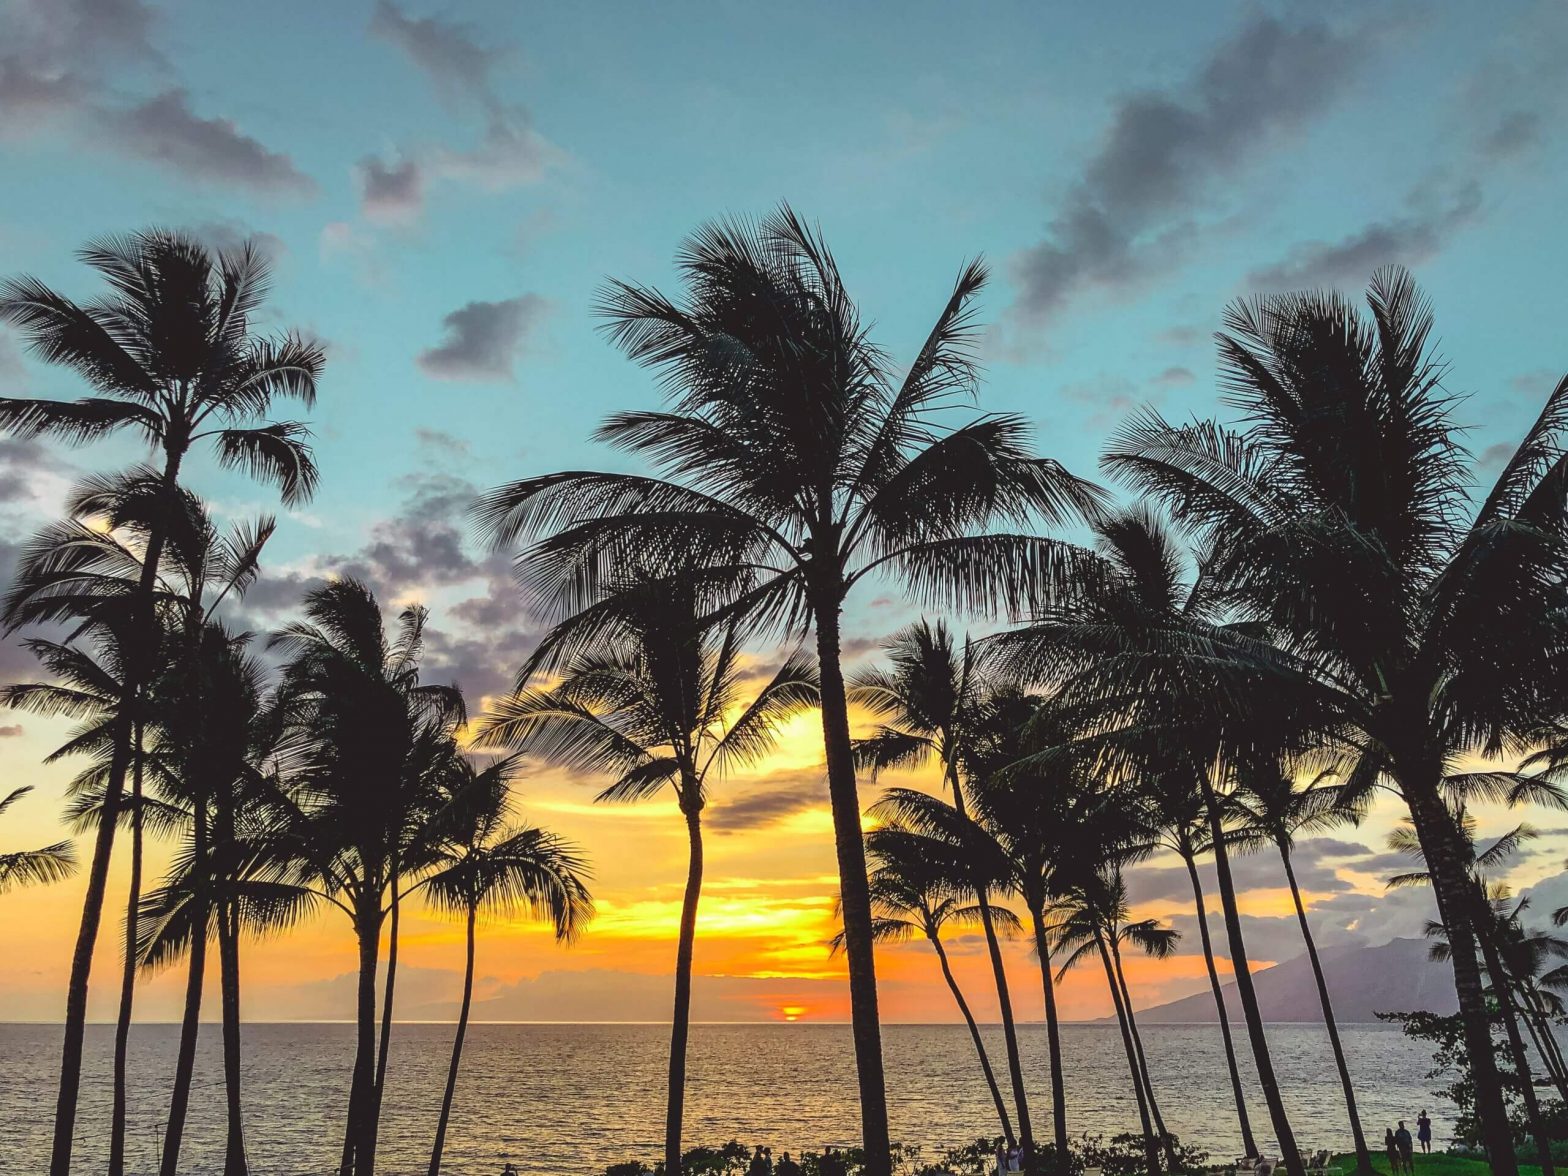 Palm Trees at sunset